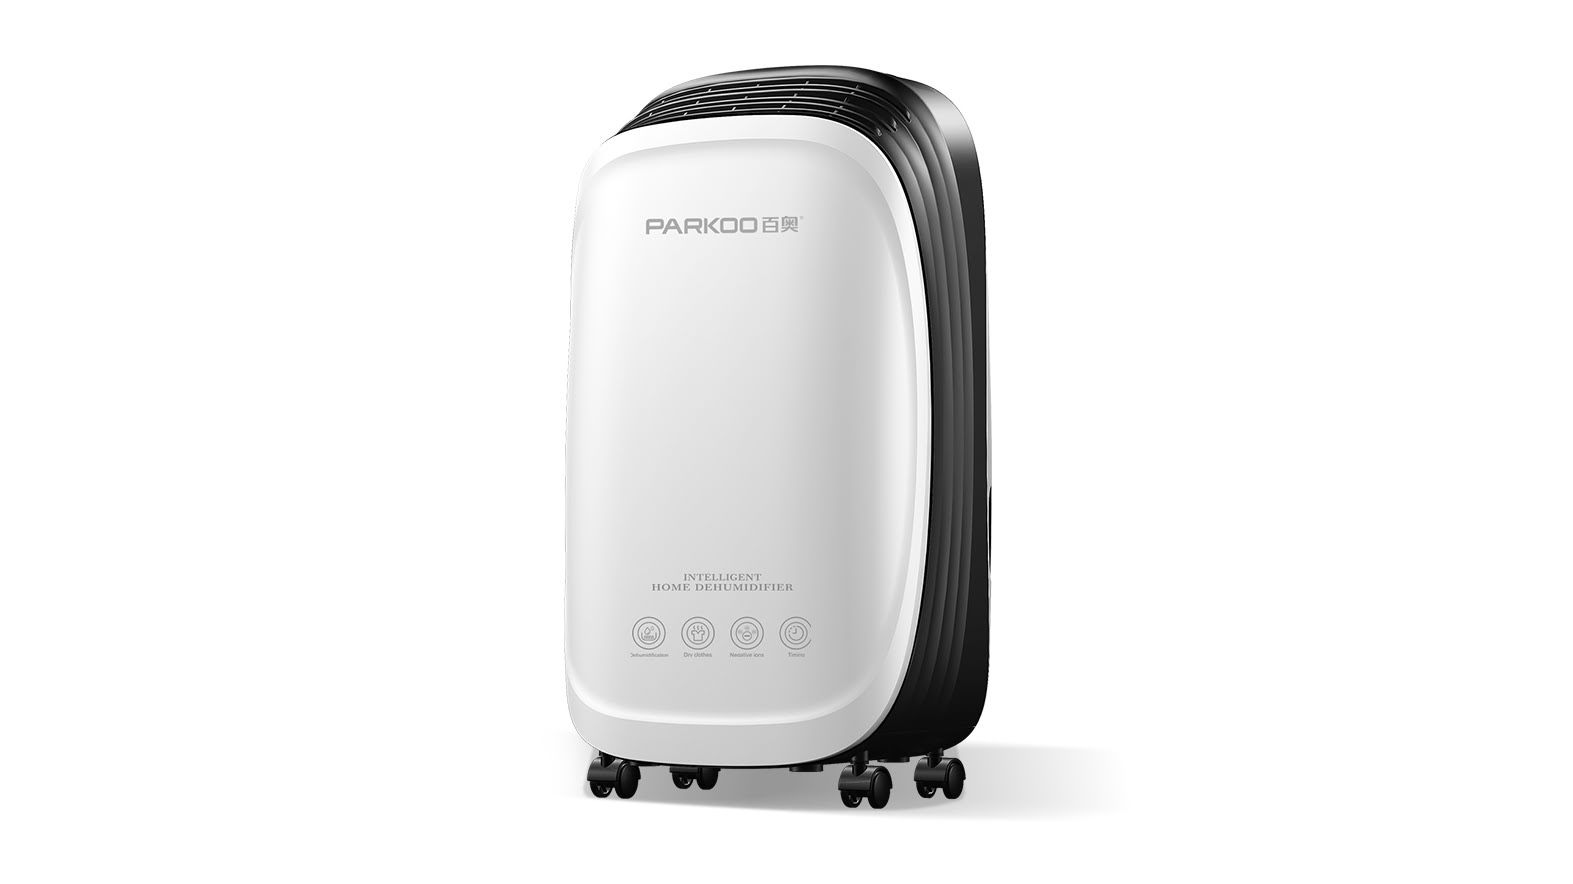 Dehumidifier solves the problem of humidity and mold in hotel rooms